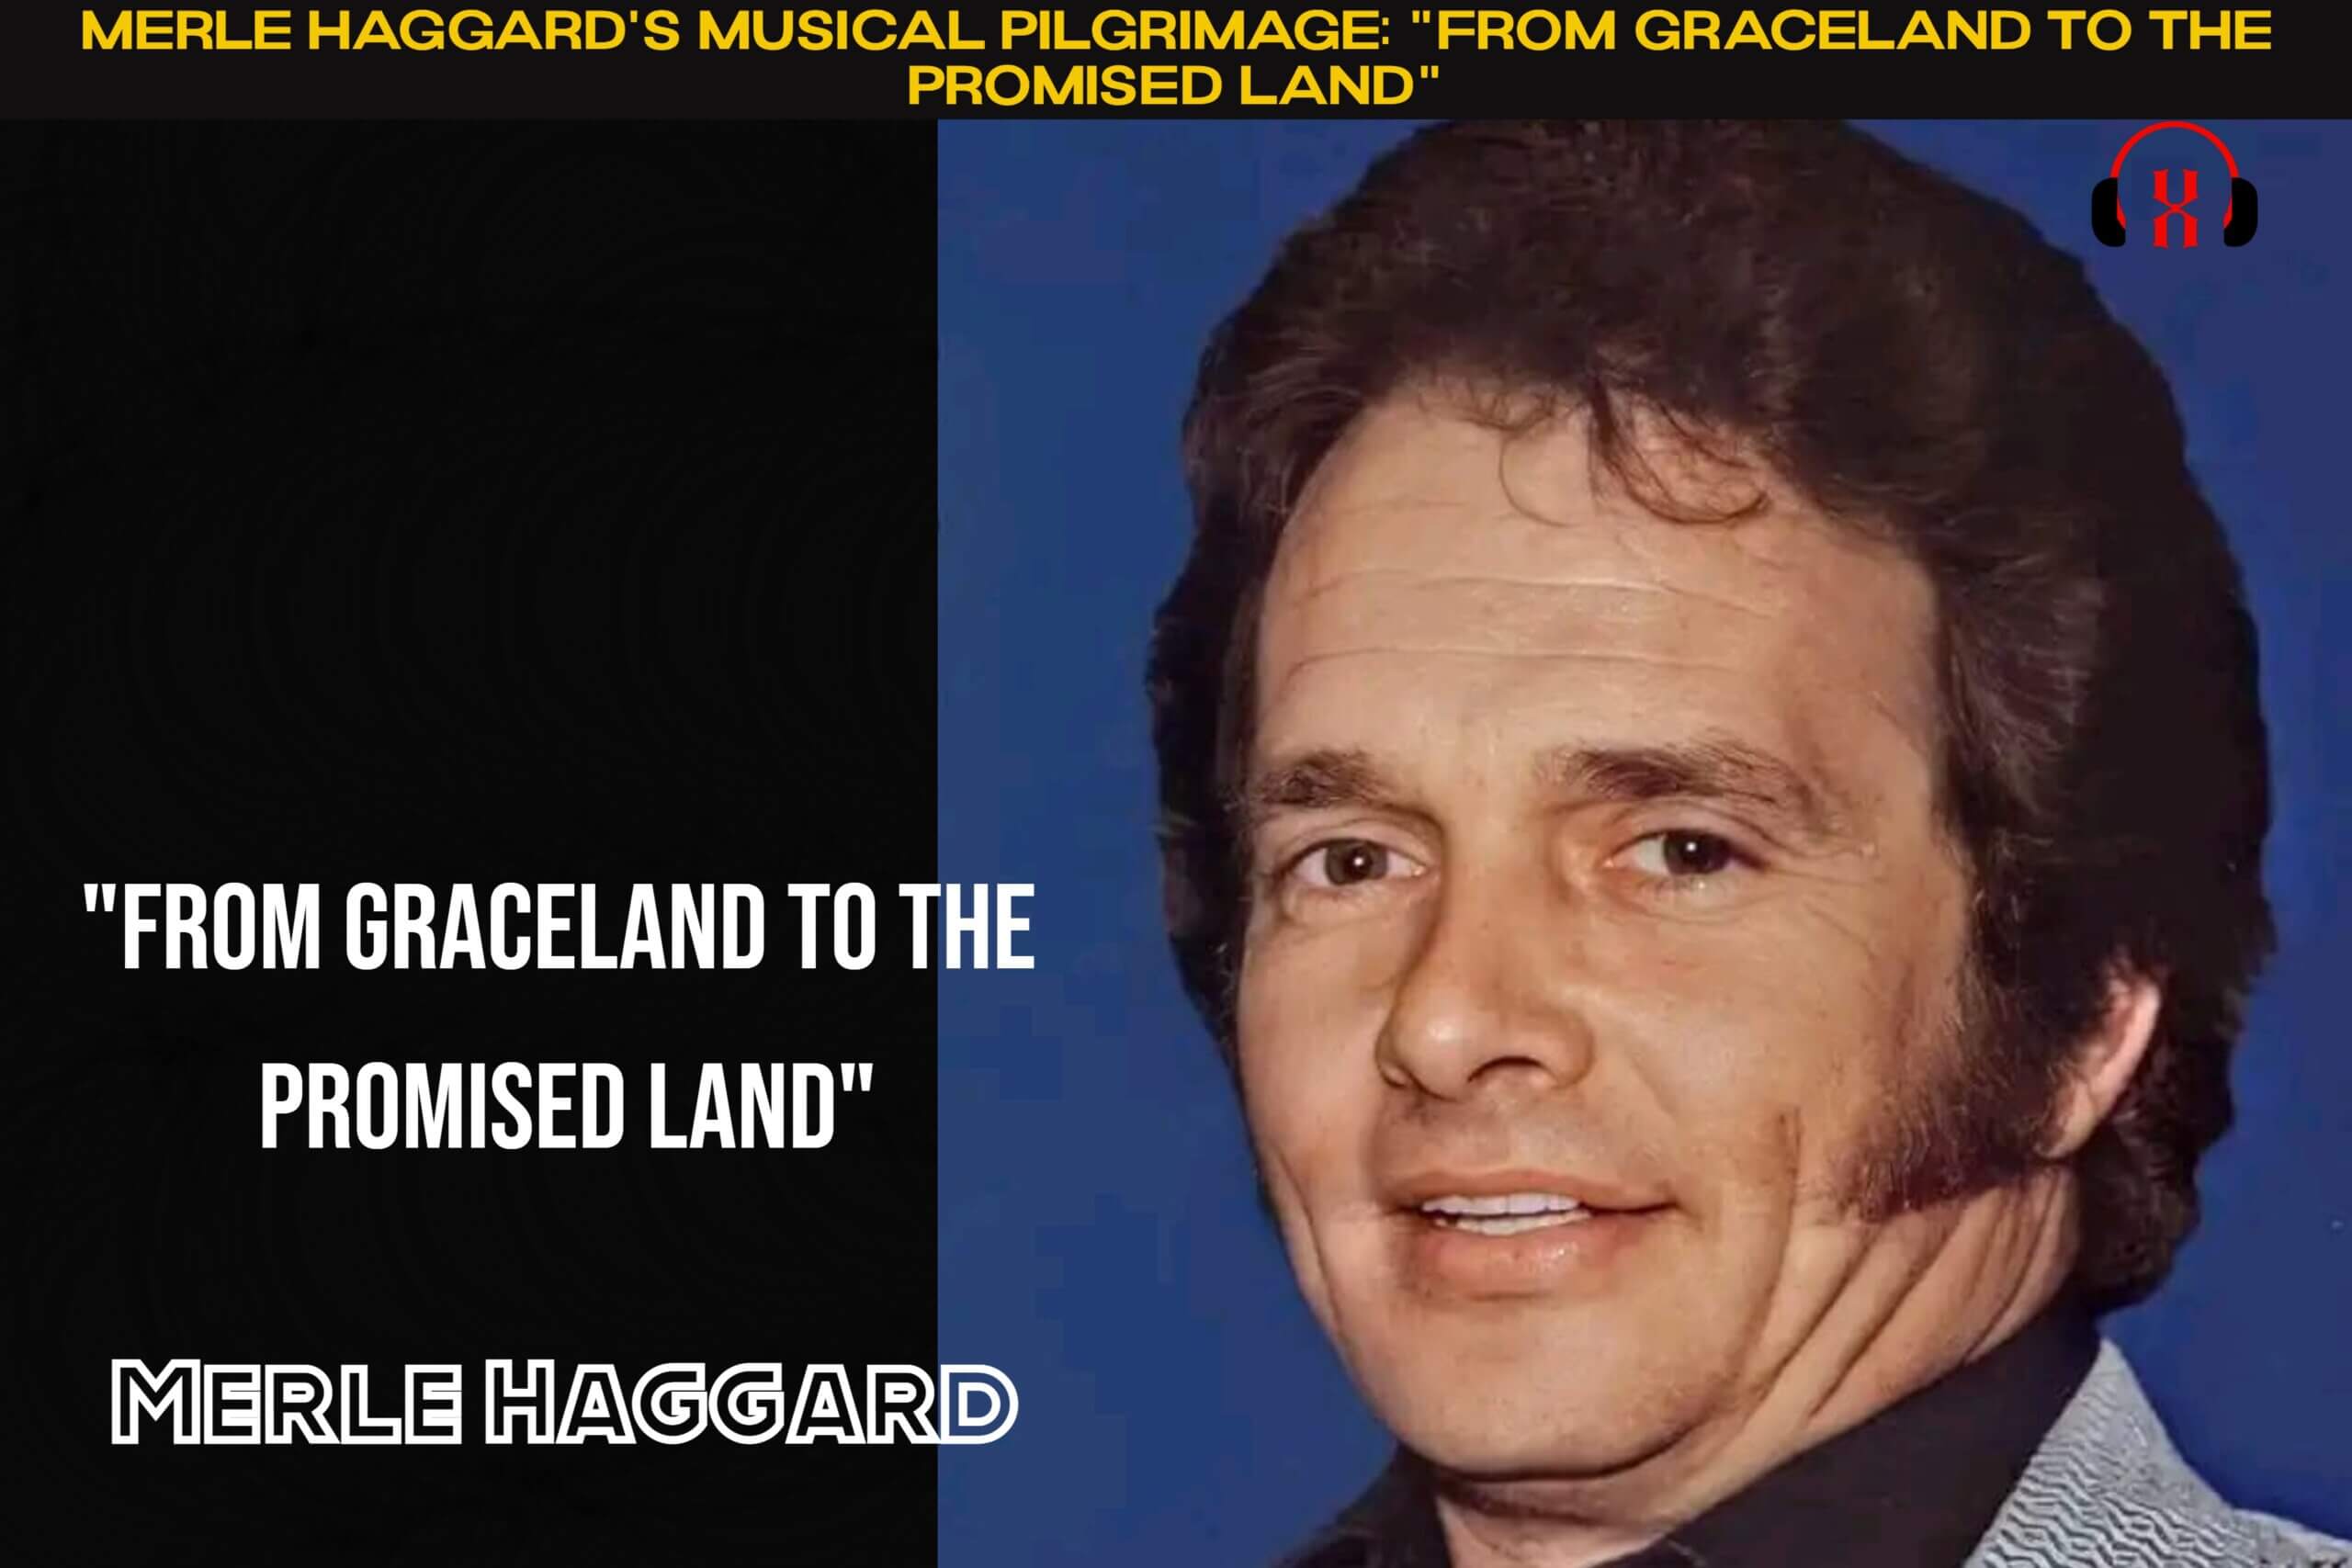 Merle Haggard’s Musical Pilgrimage: “From Graceland to the Promised Land”